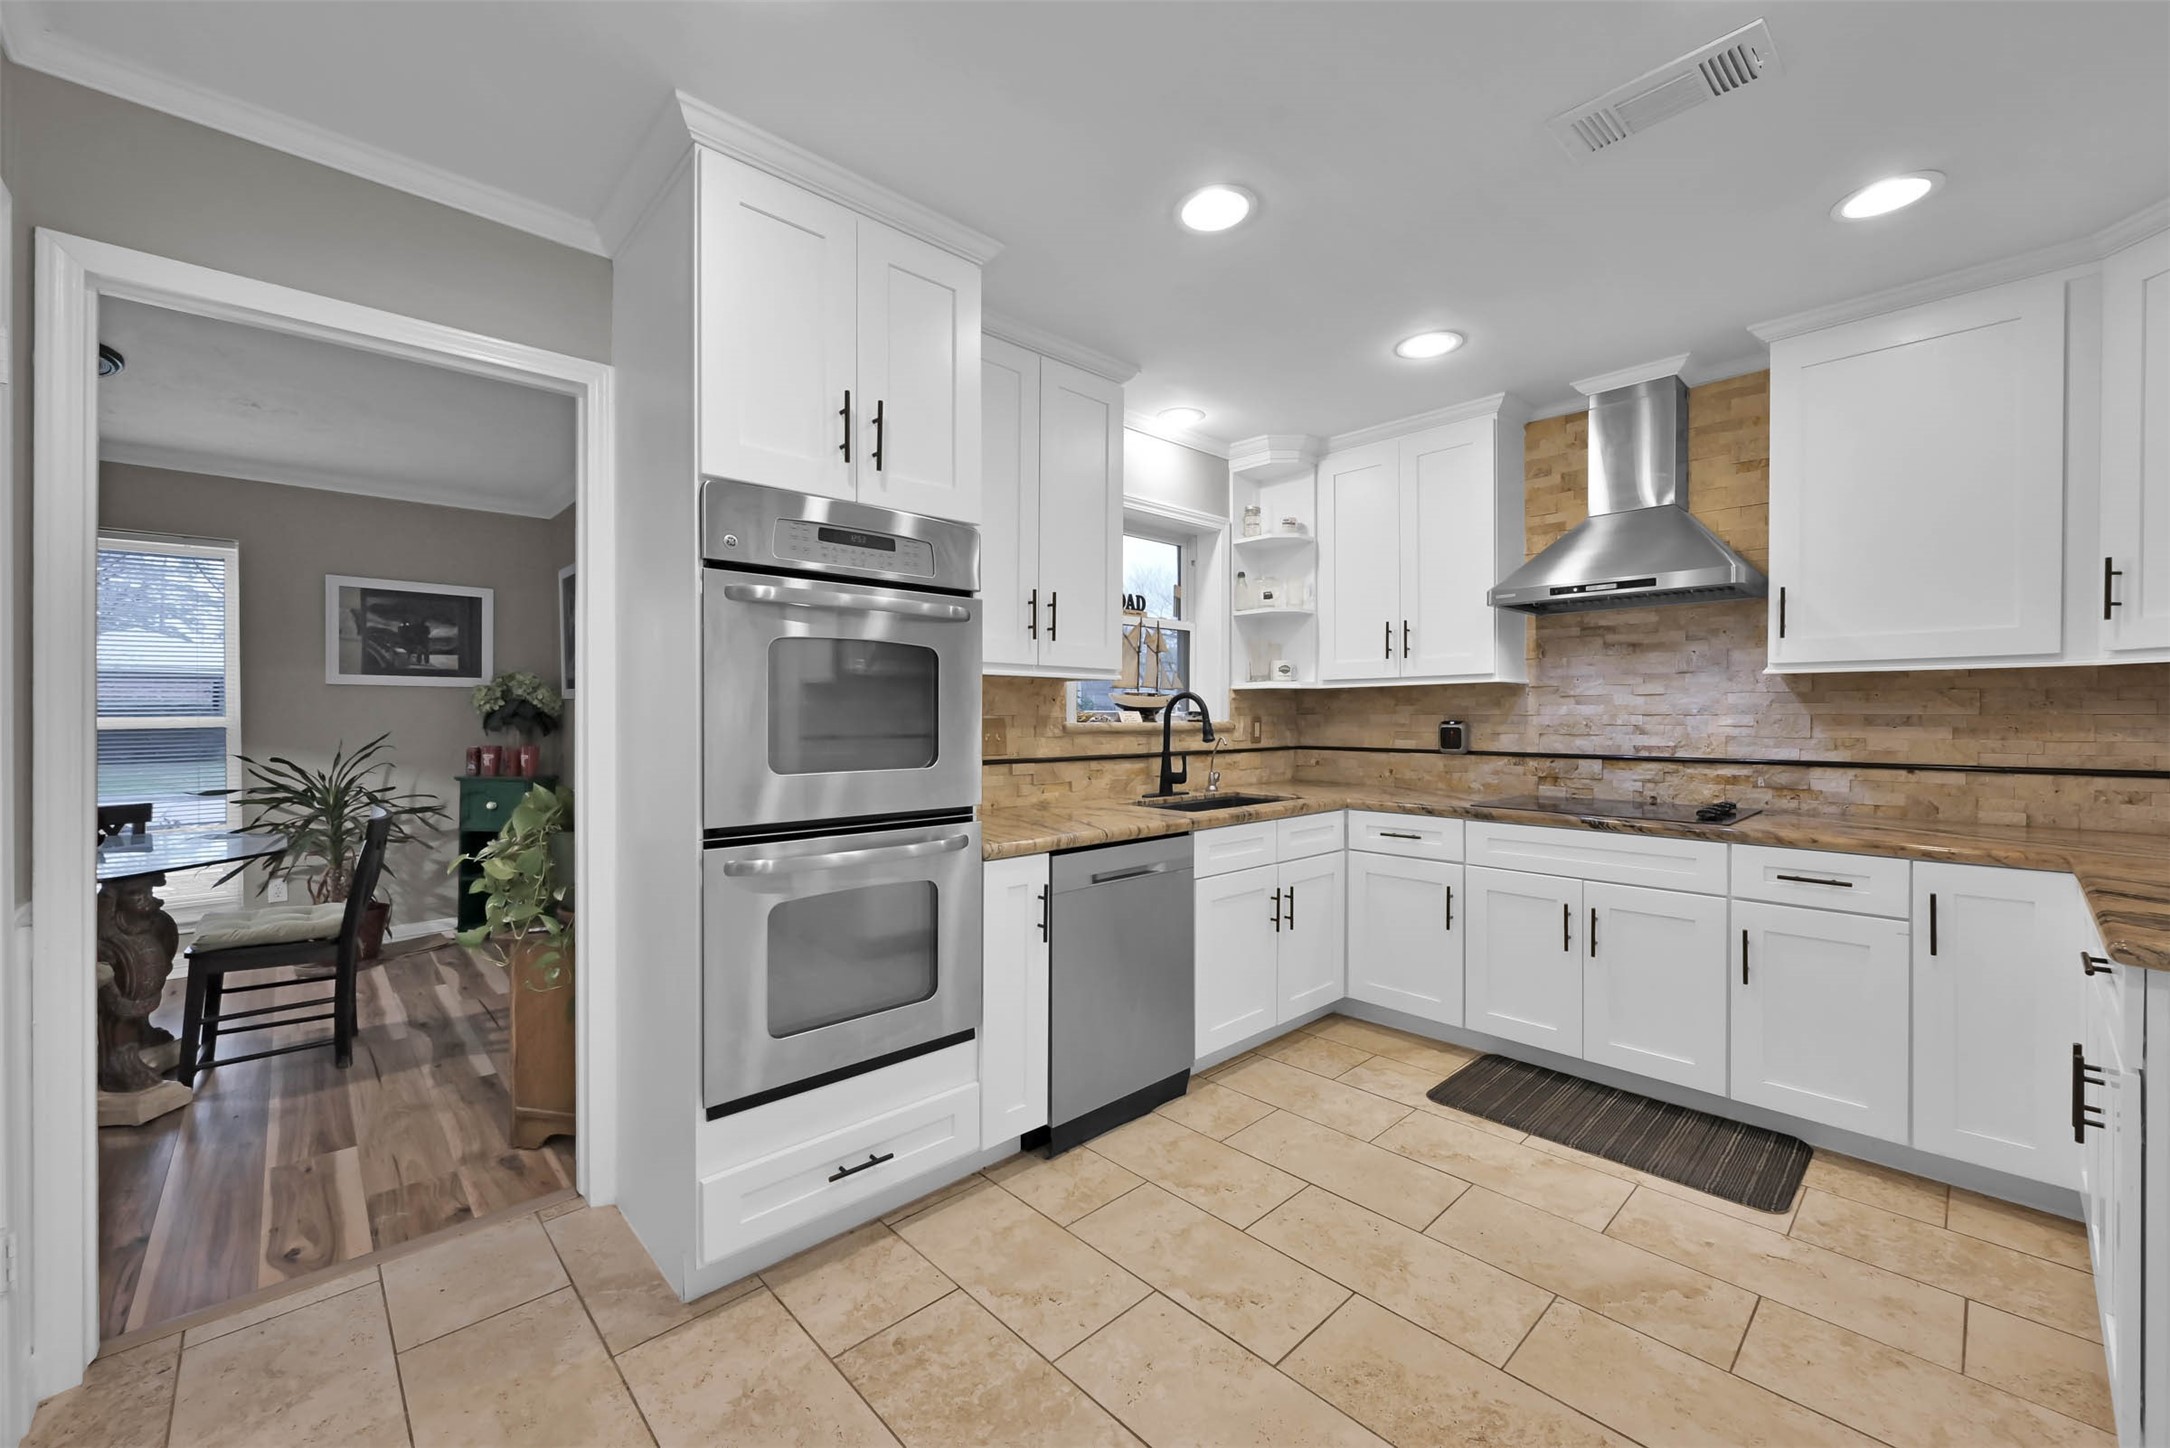 The kitchen has been completely remodeled with shaker style cabinets with soft close drawers and hardware. The tile is rectangular and set in a brick pattern.